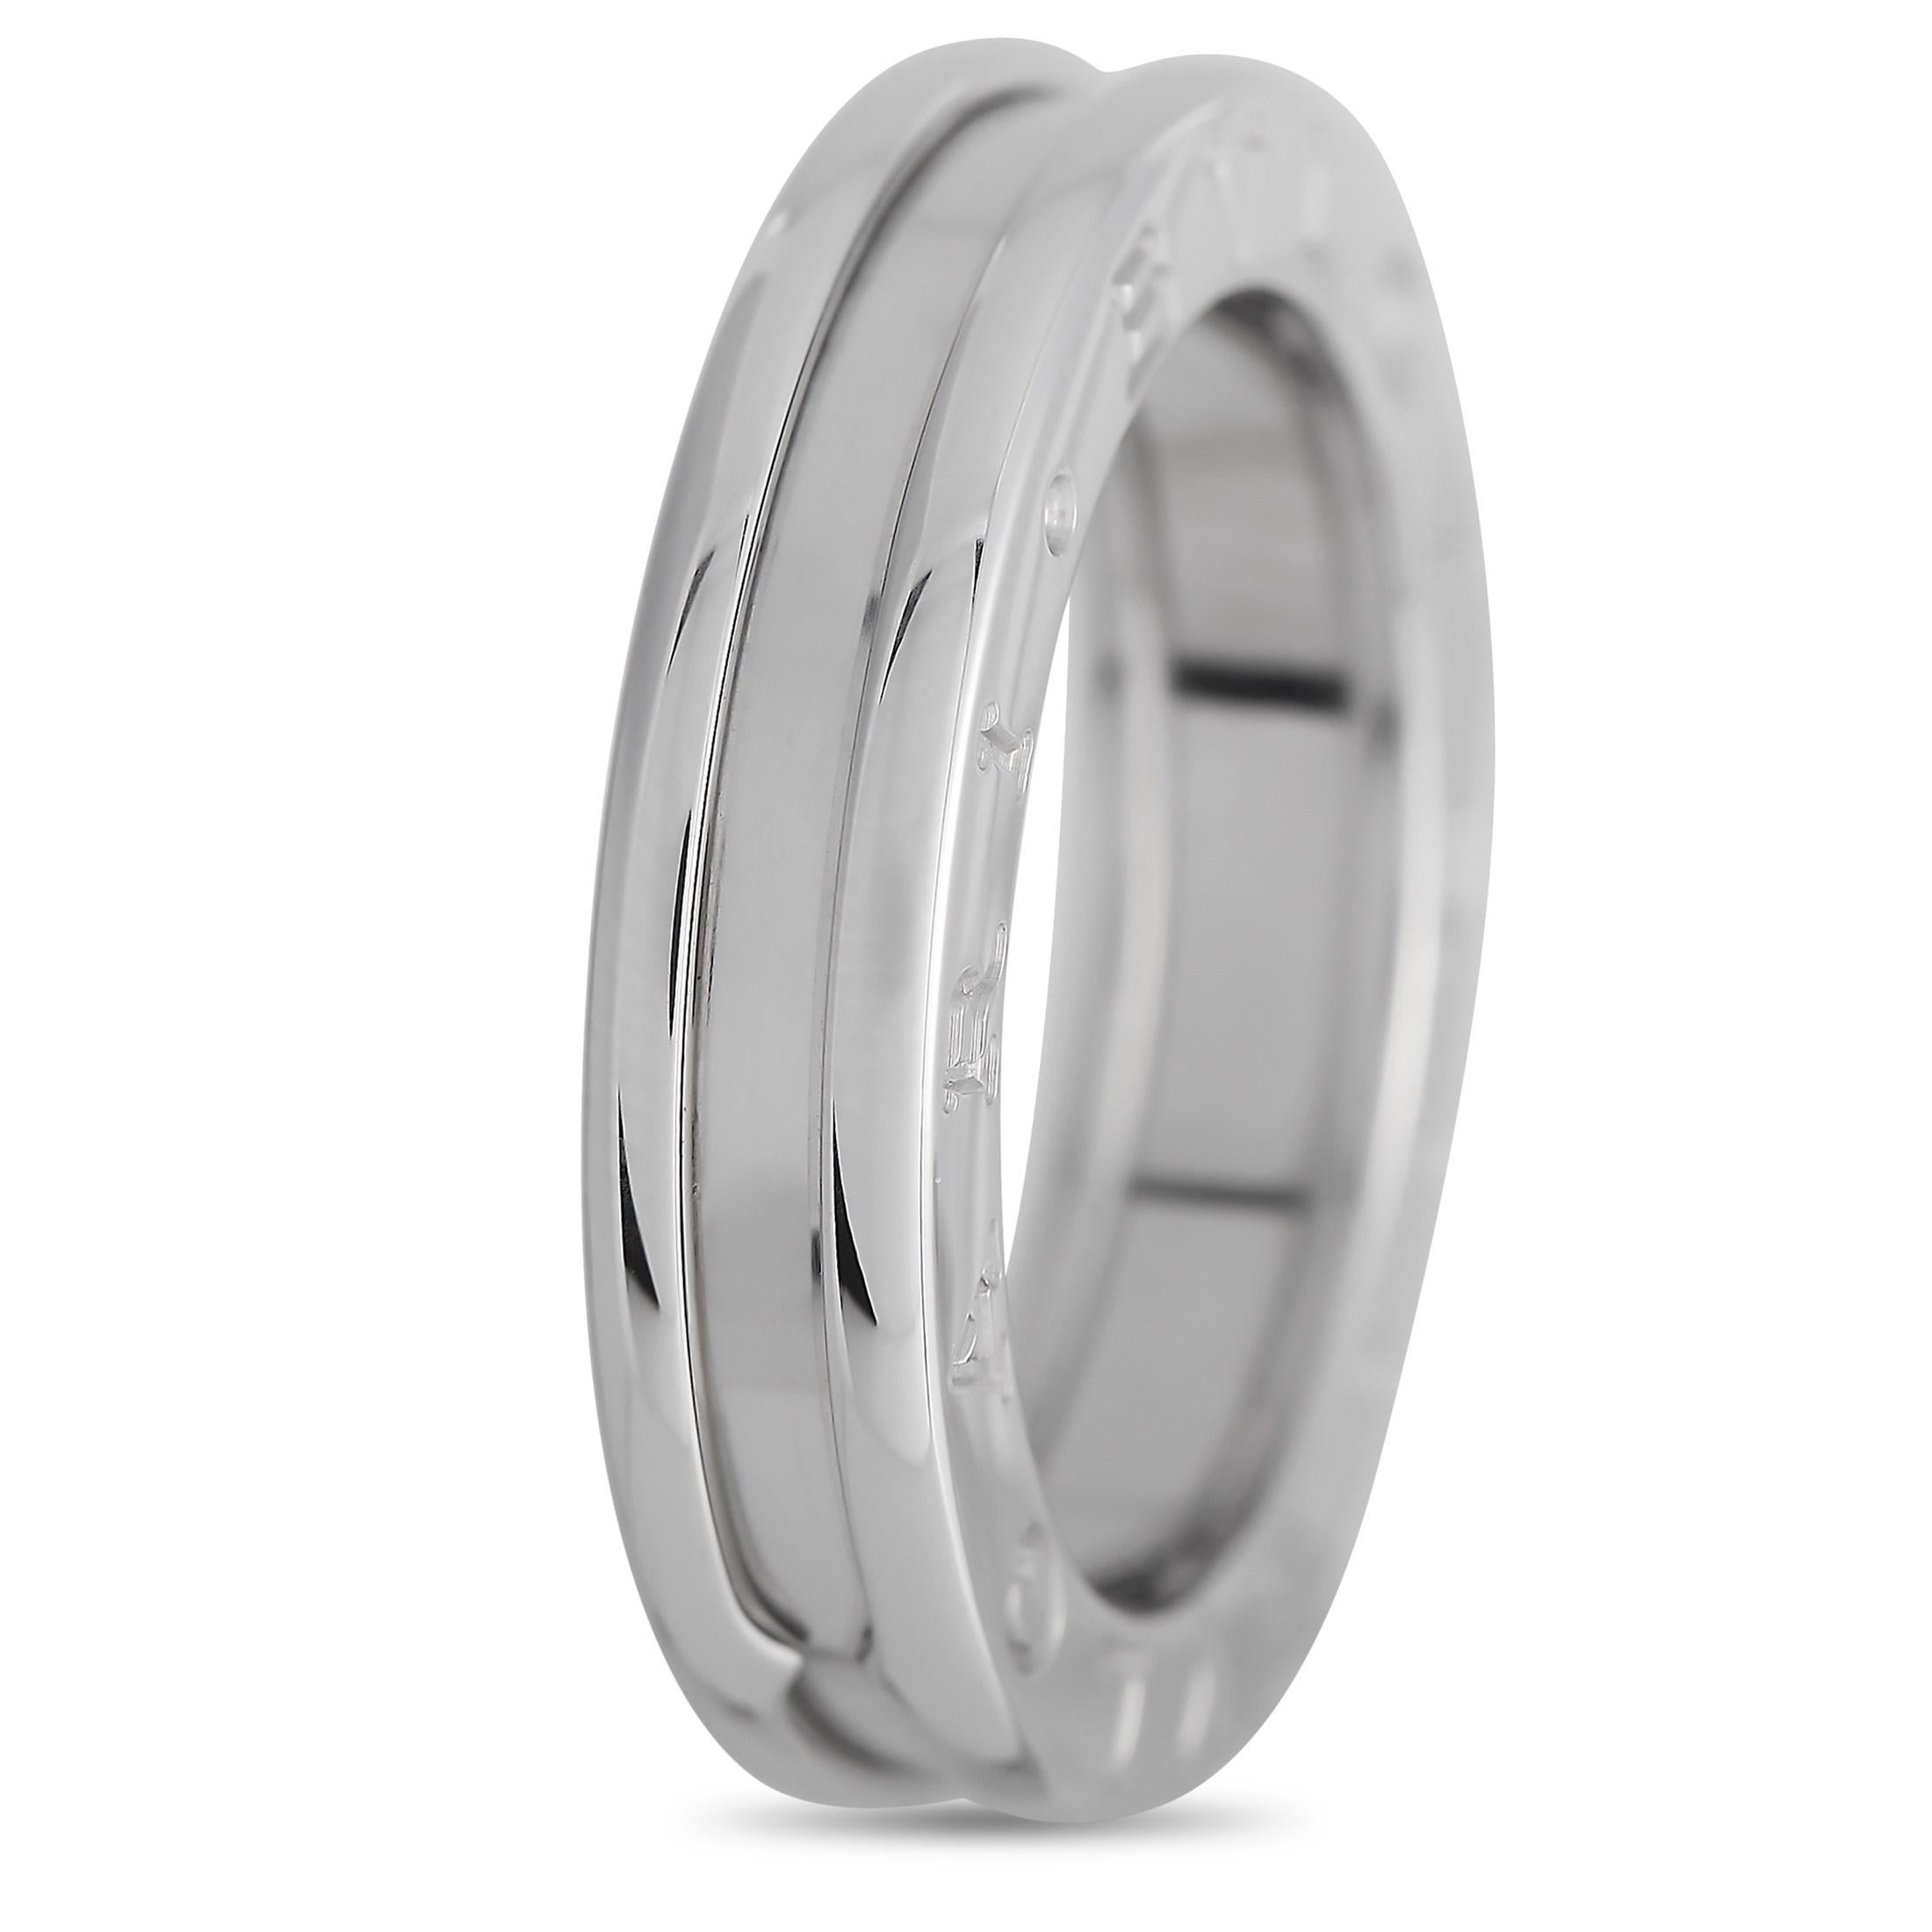 This understated Bvlgari B.Zero1 band ring has a delightfully understated design that is ideal for everyday wear. Crafted from shimmering 18K White Gold, it features intricate metalwork and the luxury brand’s moniker imprinted on the sides. This